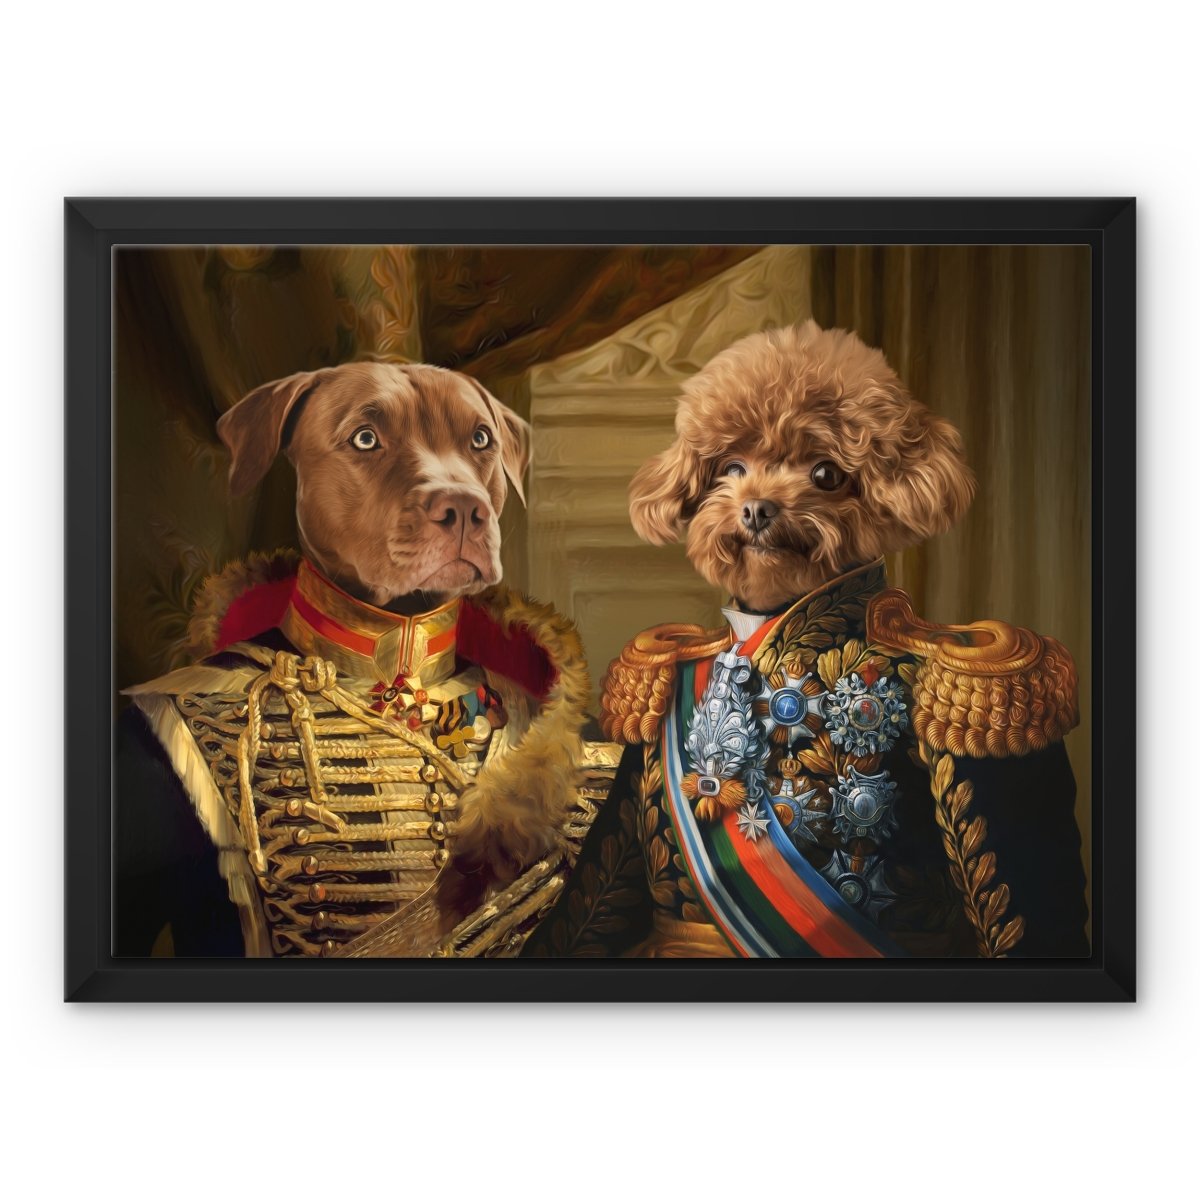 The Brothers In Arms: Custom Pet Canvas - Paw & Glory - #pet portraits# - #dog portraits# - #pet portraits uk#pawandglory, pet art canvas,dog canvas, personalized dog and owner canvas uk, pet canvas uk, canvas of my dog, dog canvas wall art